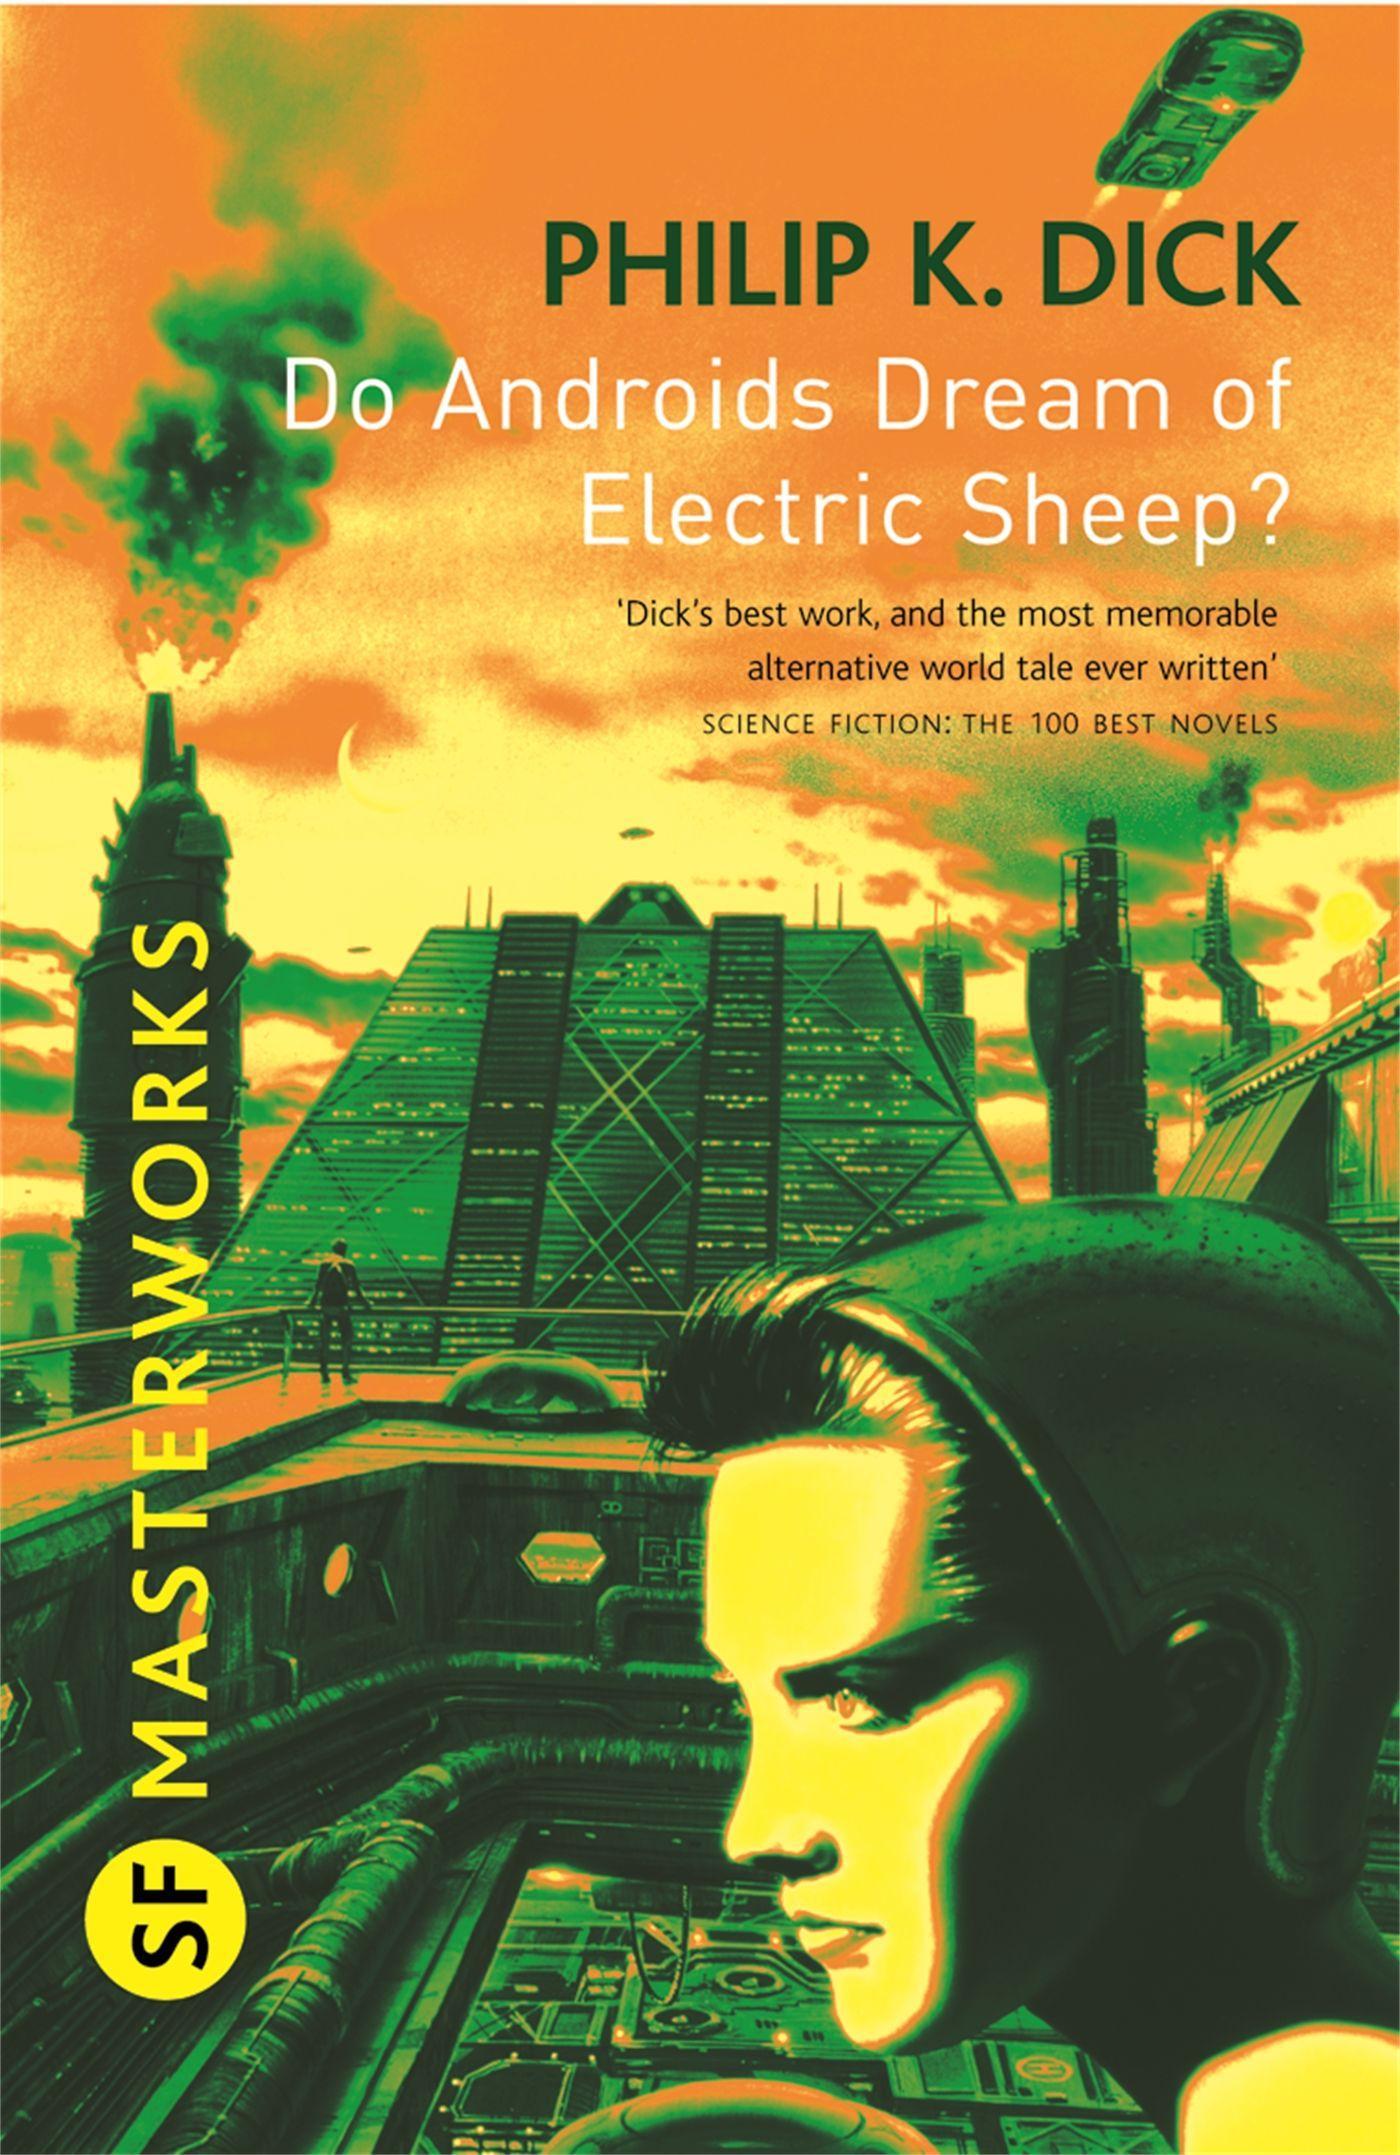 Do Androids Dream of Electric Sheep? | The novel which became 'Blade Runner' | Philip K. Dick | Taschenbuch | S. F. Masterworks | 195 S. | Englisch | 2010 | Orion Publishing Group | EAN 9780575094185 - Dick, Philip K.